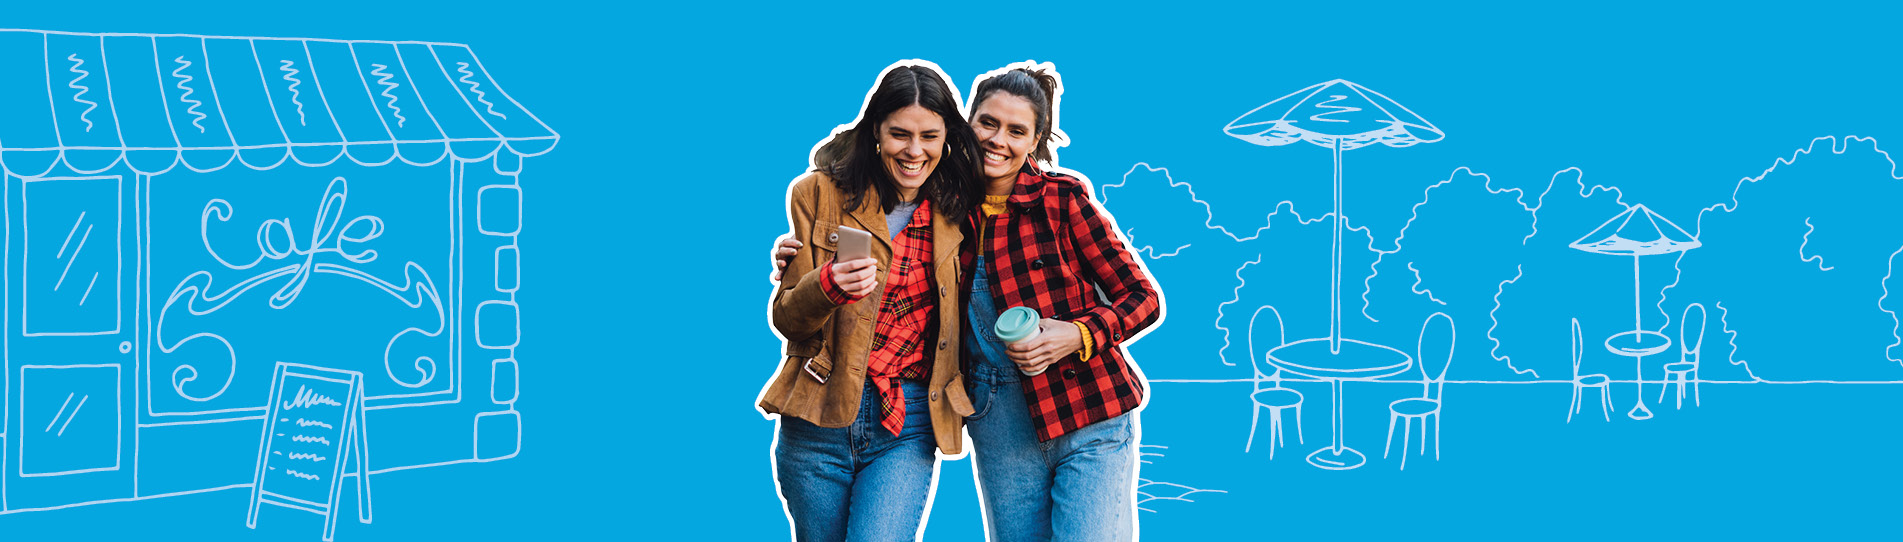 two women laughing walking arm-in-arm holding coffee cups